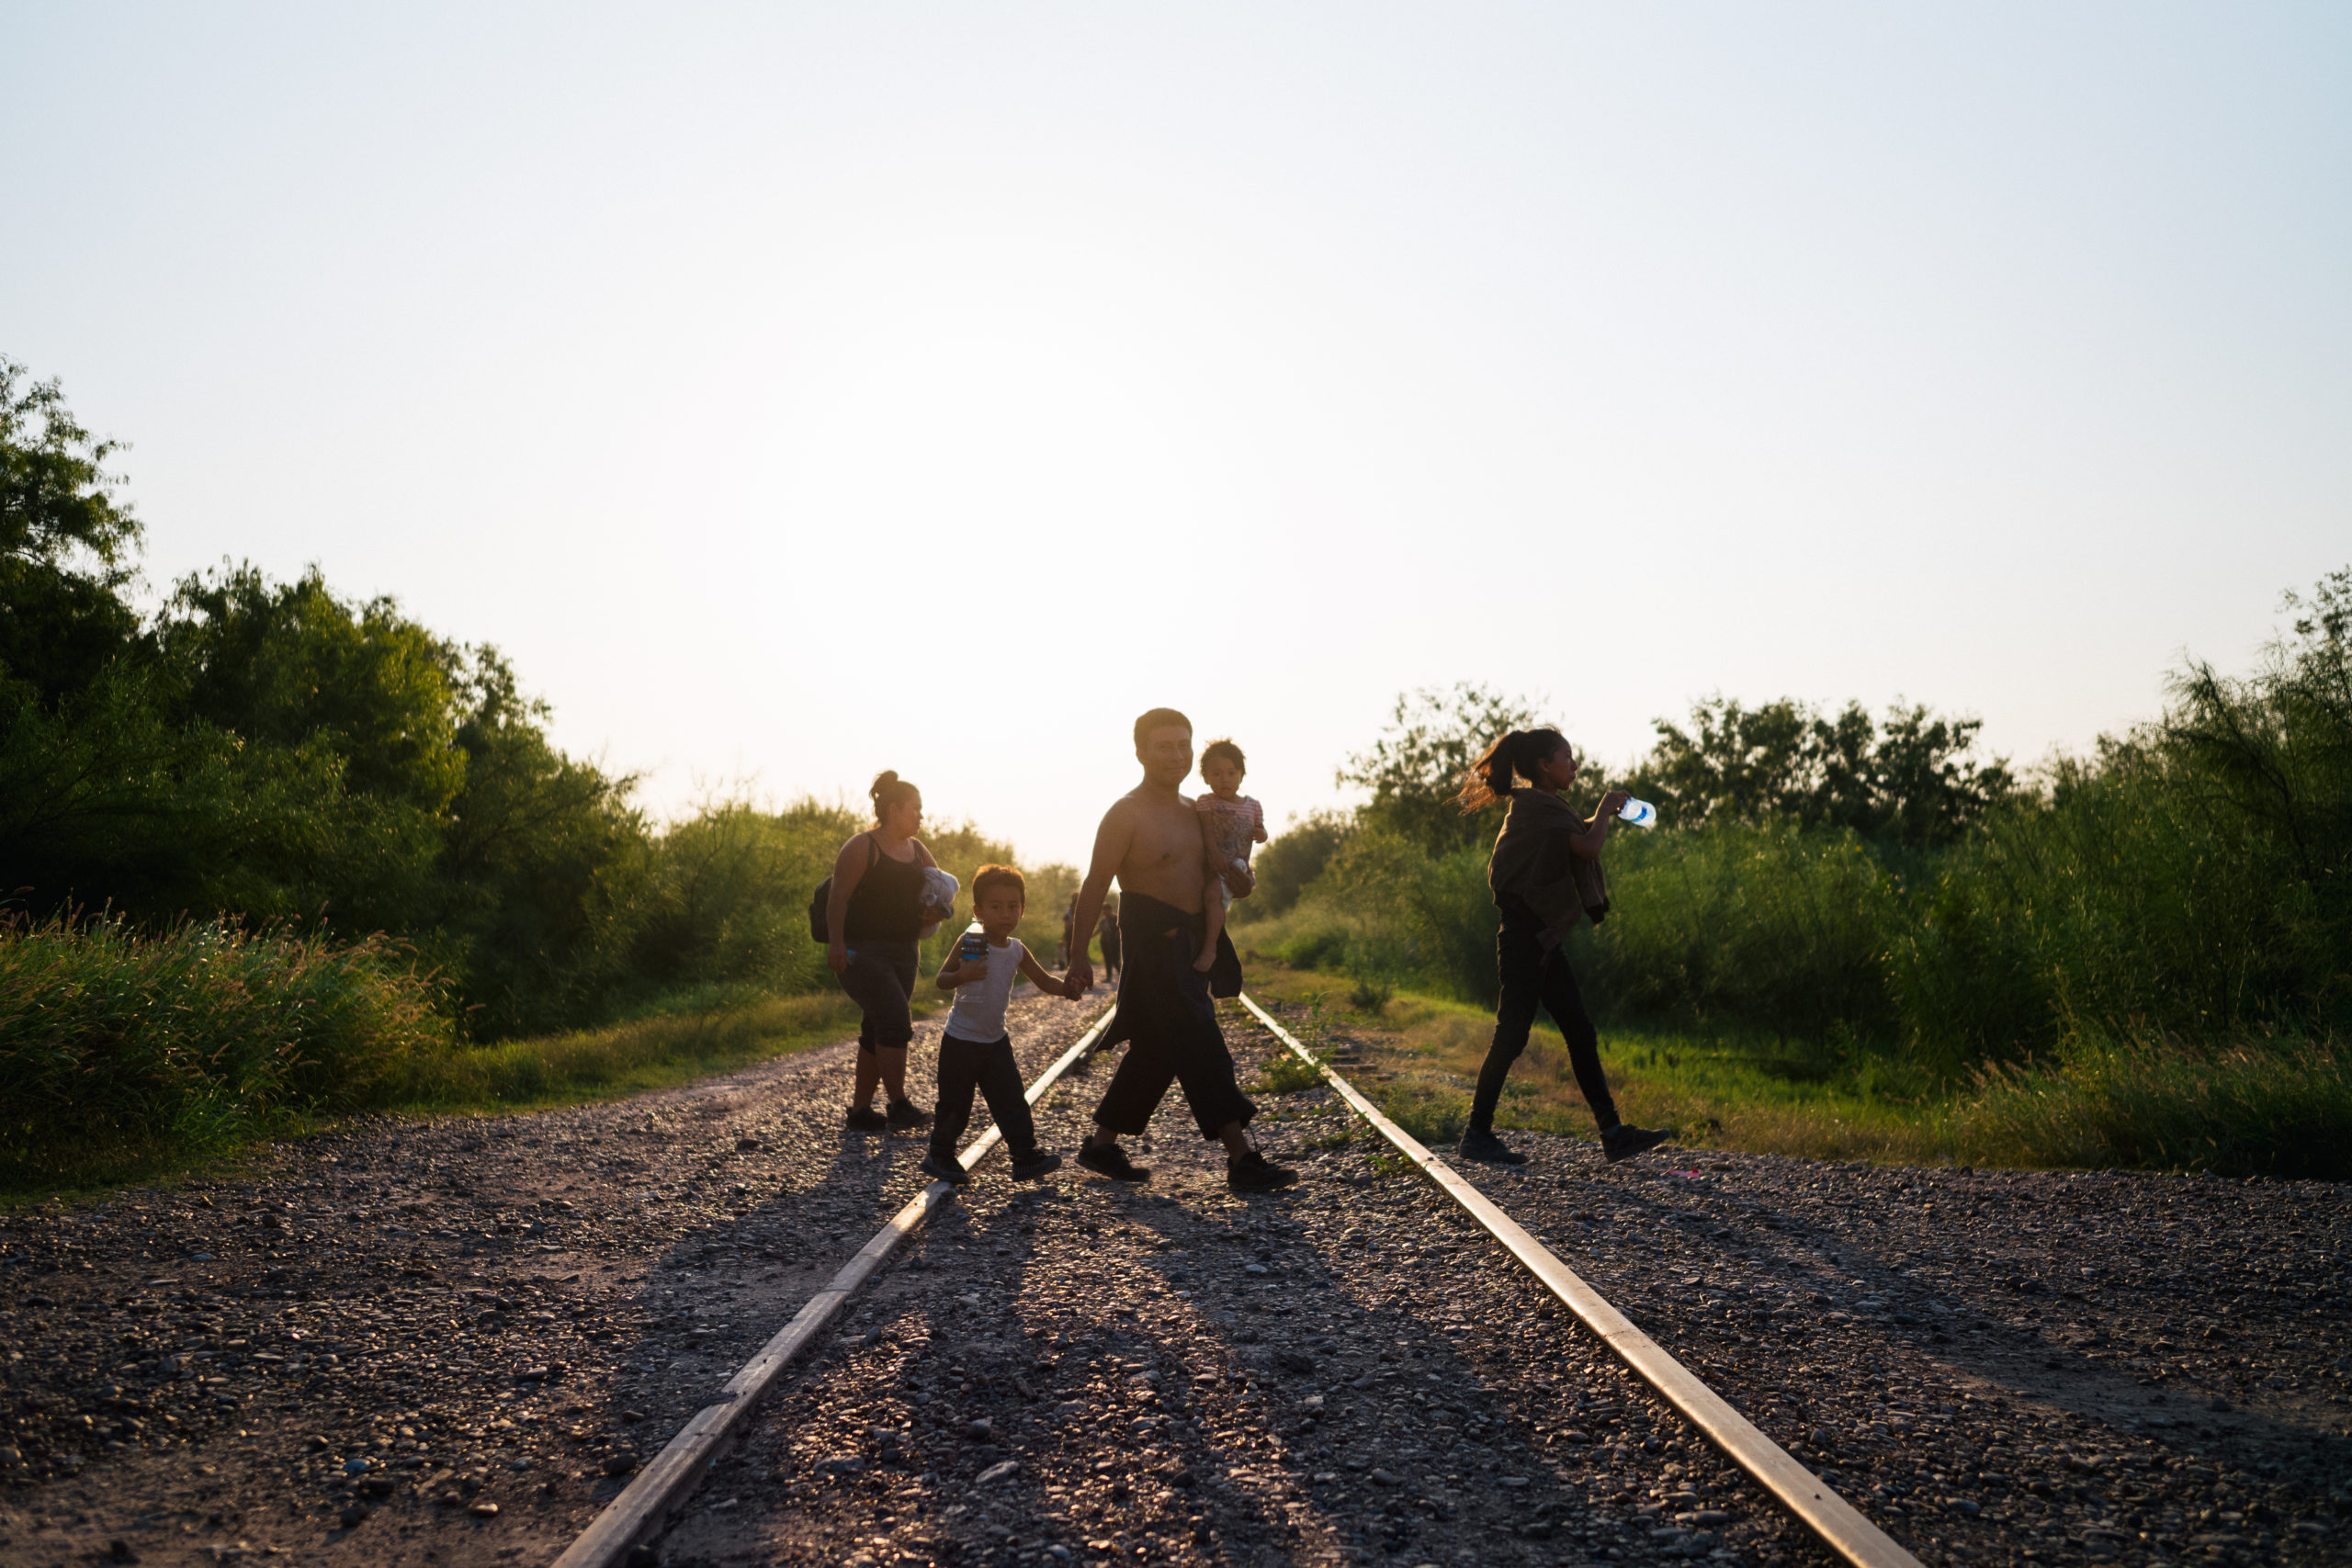 LA JOYA, TEXAS - JUNE 21: Immigrants walk towards border patrol after crossing the Rio Grande into the U.S. on June 21, 2021 in La Joya, Texas. A surge of mostly Central American immigrants crossing into the United States has challenged U.S. immigration agencies along the U.S. Southern border. (Photo by Brandon Bell/Getty Images)